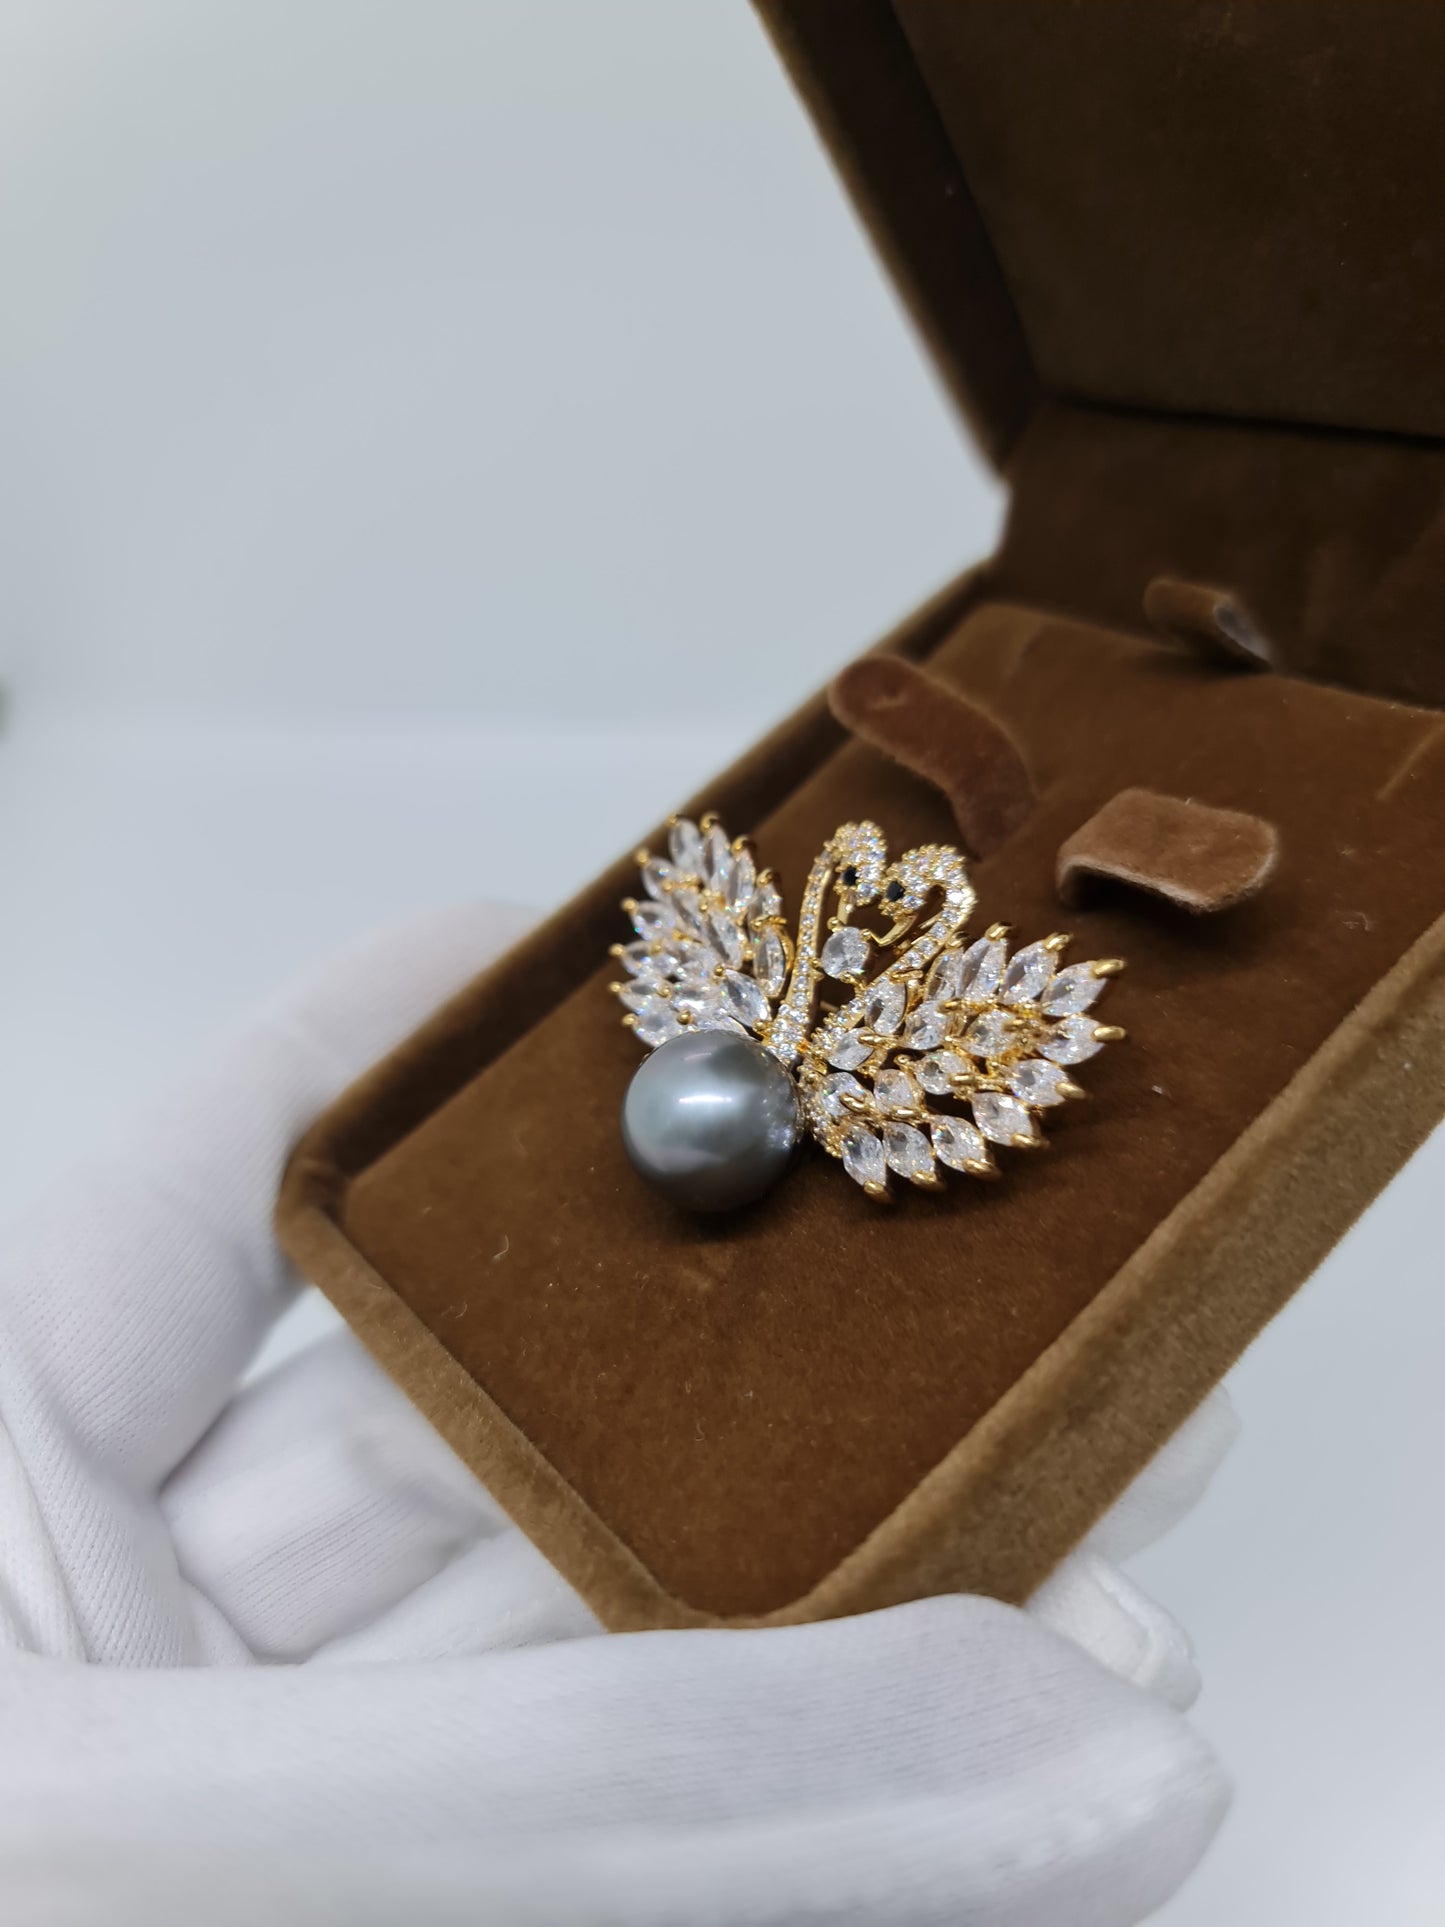 13mm Gray Black South Sea Pearls Brooch Pendant Plated